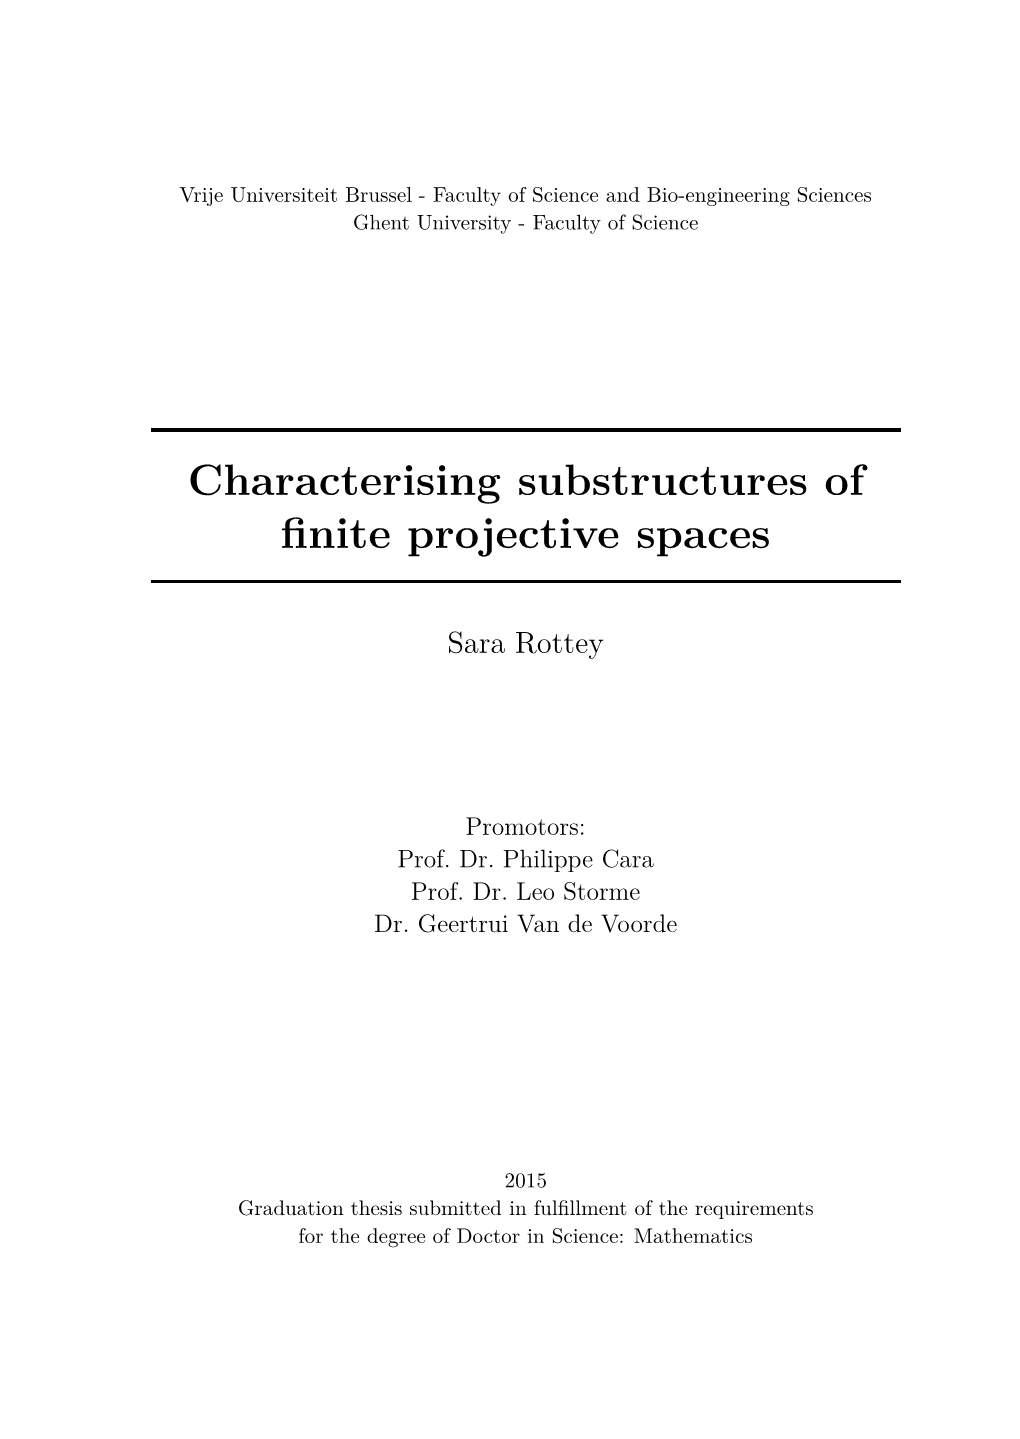 Characterising Substructures of Finite Projective Spaces